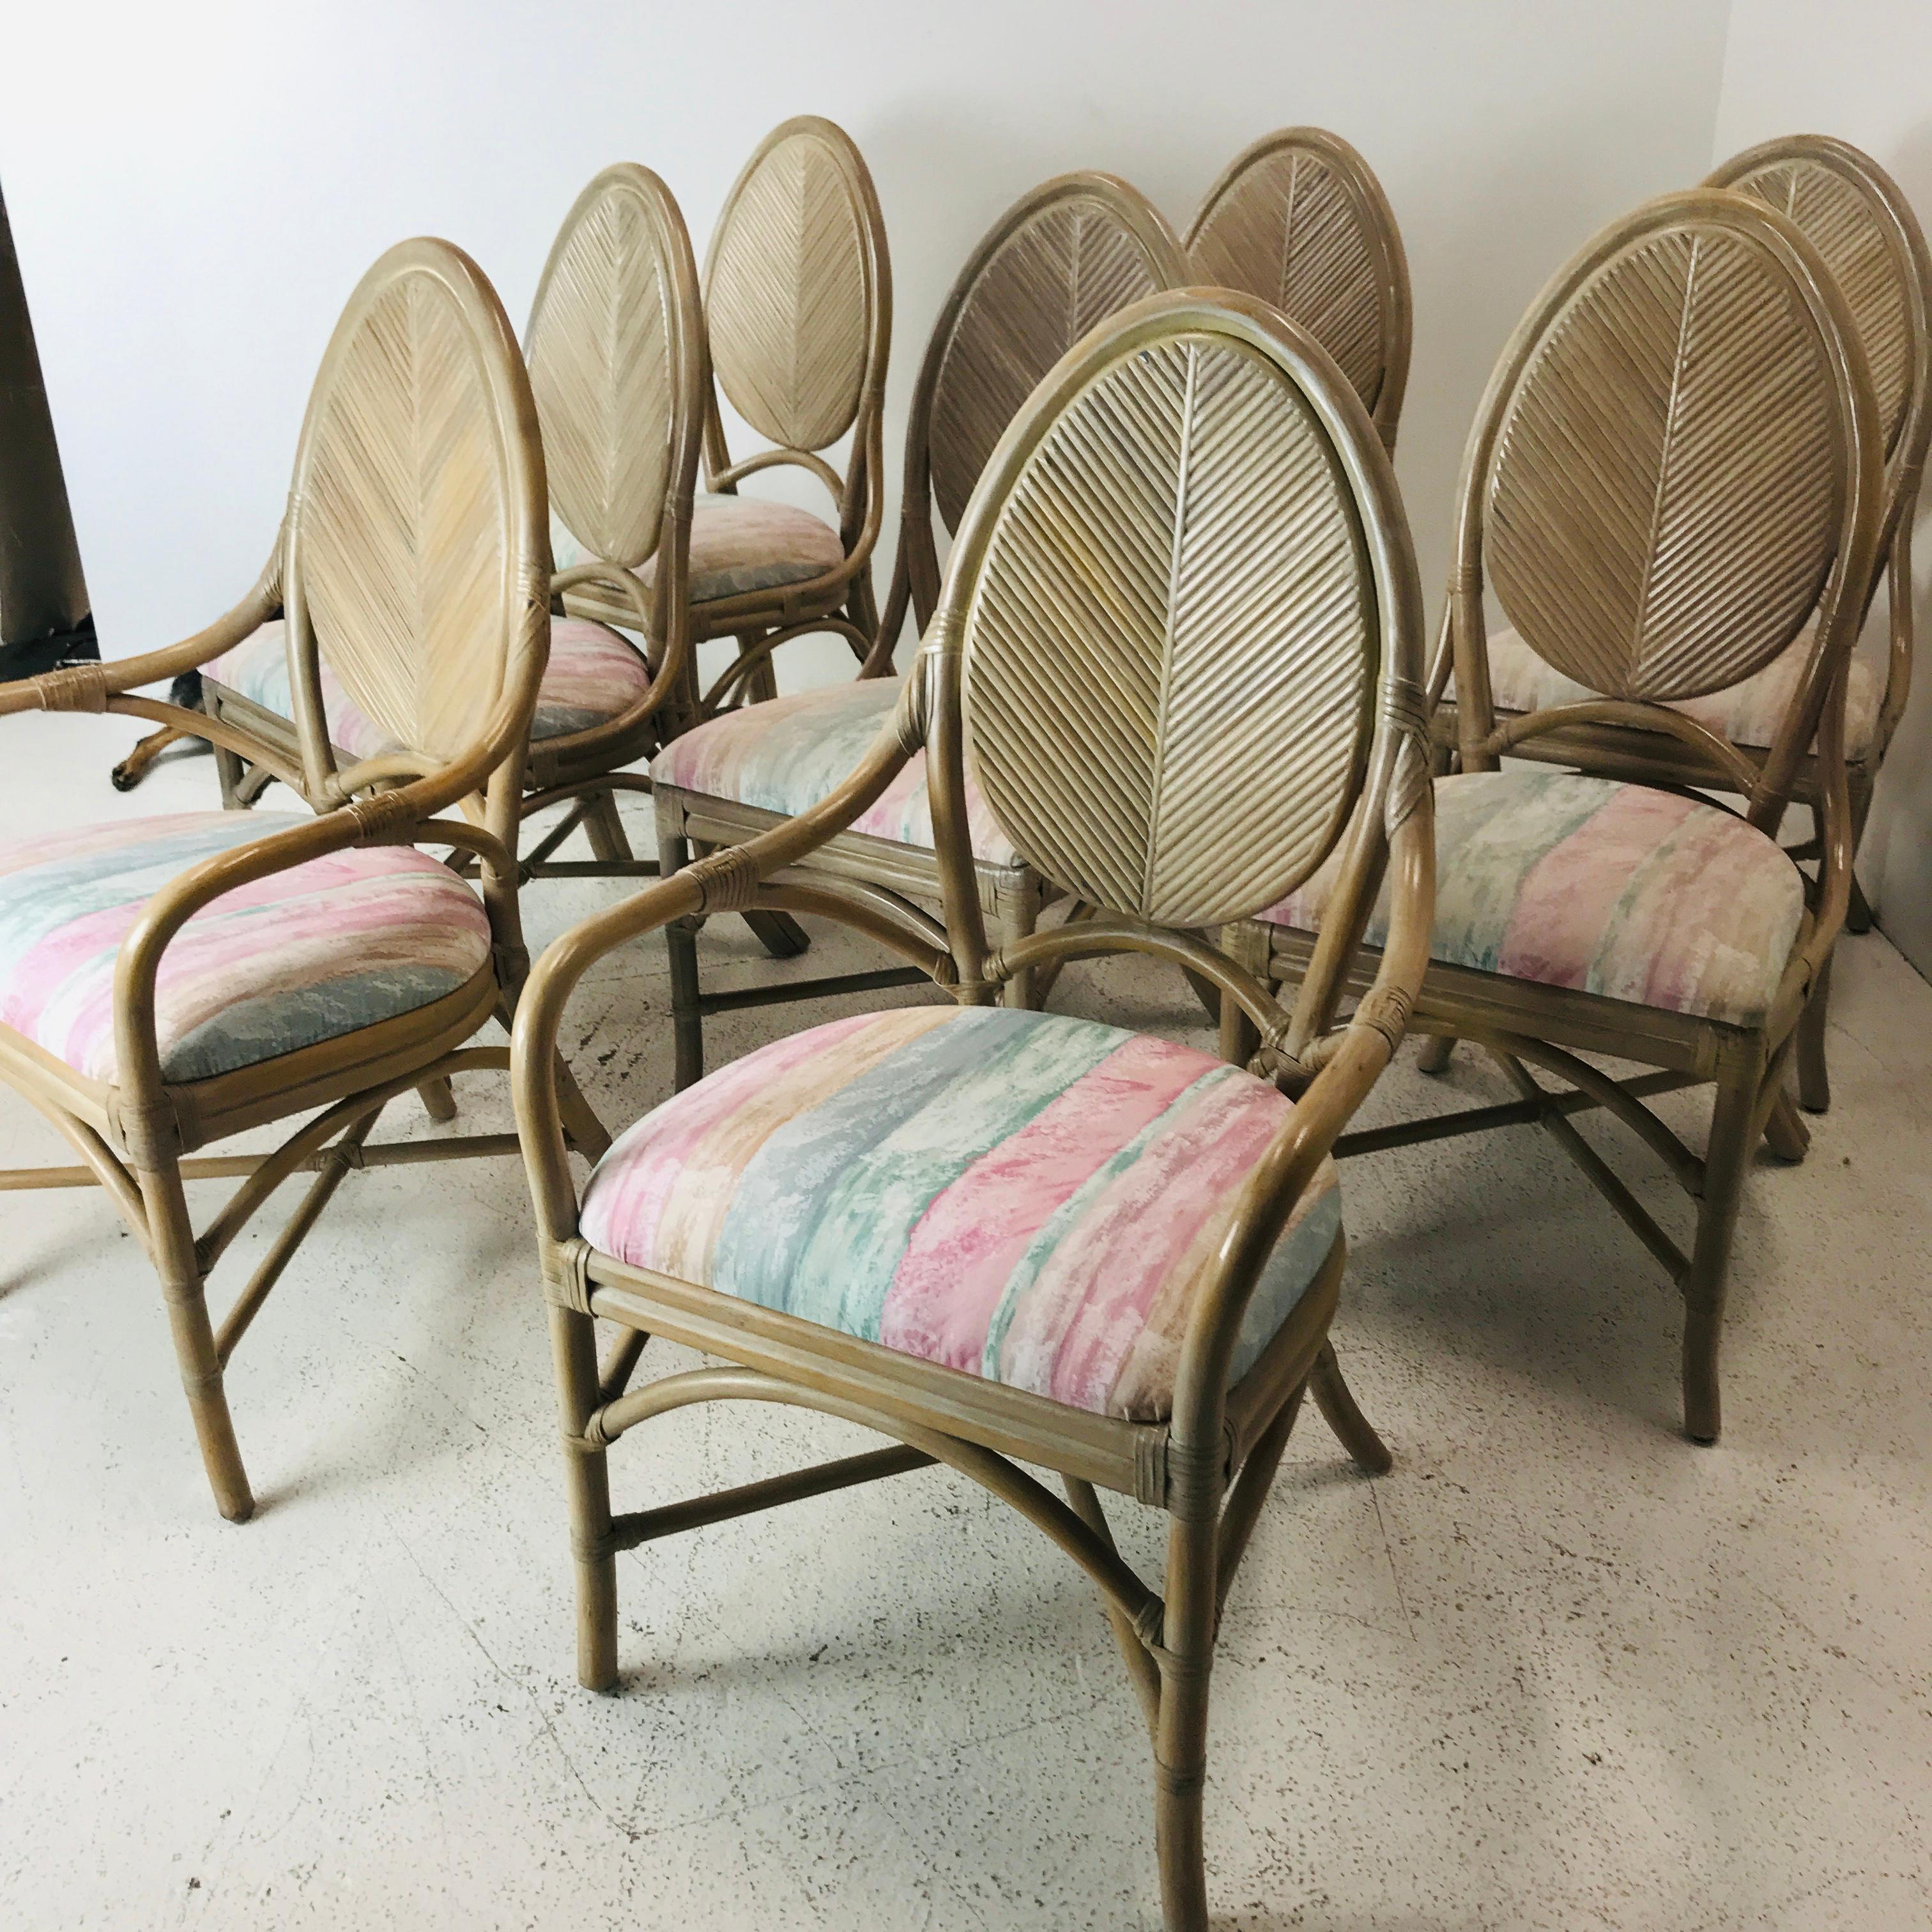 Set of 8 McGuire rattan bistro style dining chairs featuring a distressed lacquer finish with floral upholstery. Includes 2 chairs with arms and 6 side chairs.